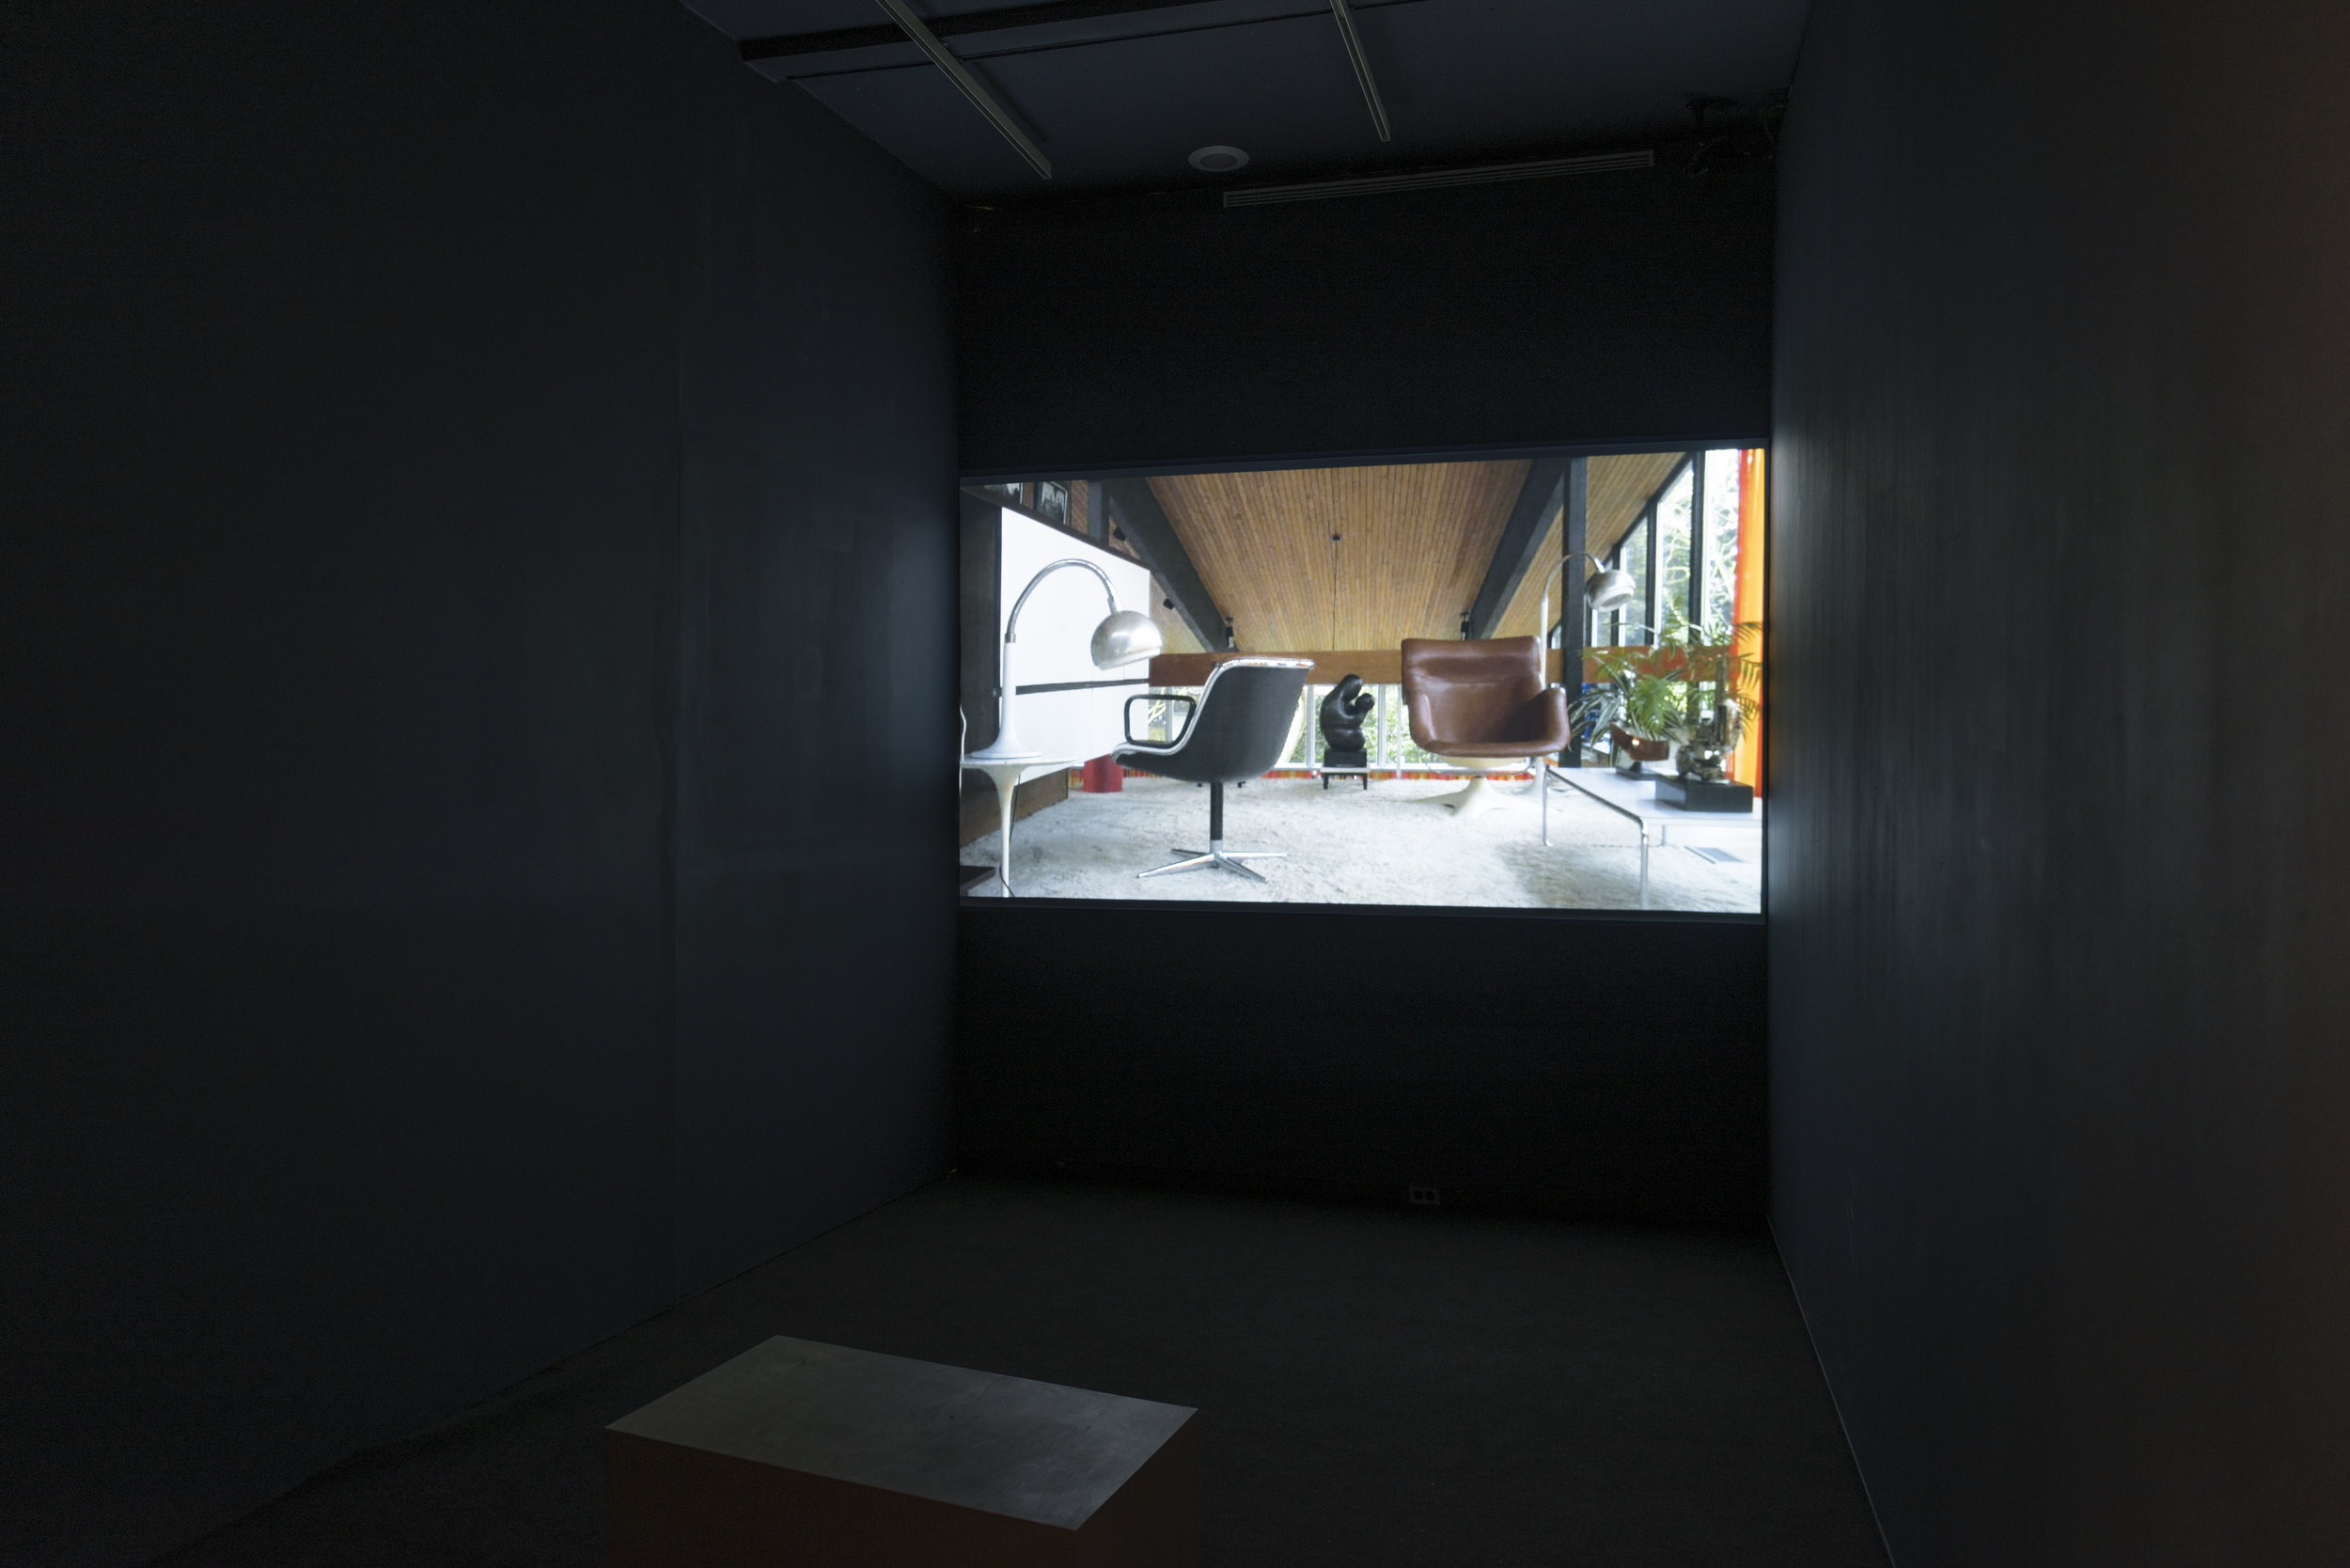  Elizabeth Price,&nbsp; AT THE HOUSE OF MR X , 2007, video, 20 minutes. Courtesy the artist and MOT International, London and Brussels. 